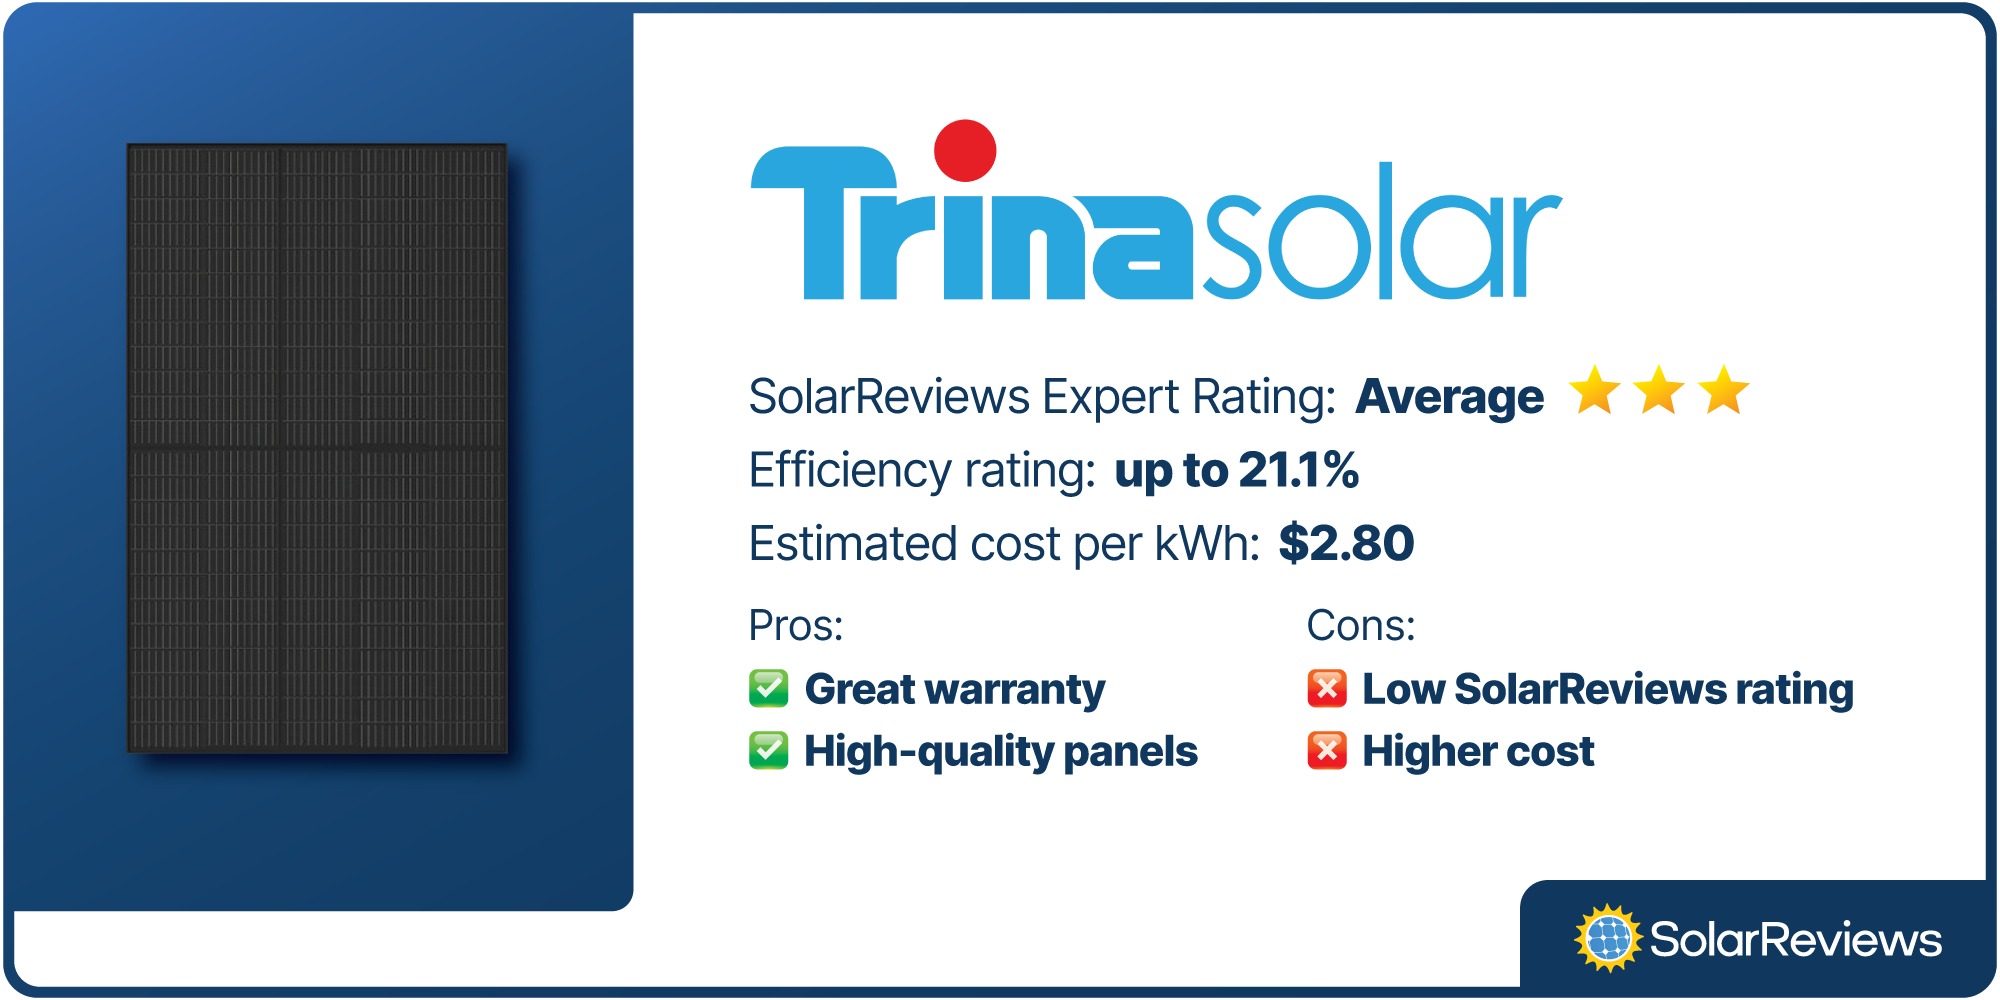 Number three on the list for cheap solar panels is Trina Solar. This panel has an average rating from SolarReviews' experts and an efficiency rating up to 21.1%. This panel costs around $2.80 per kWh.